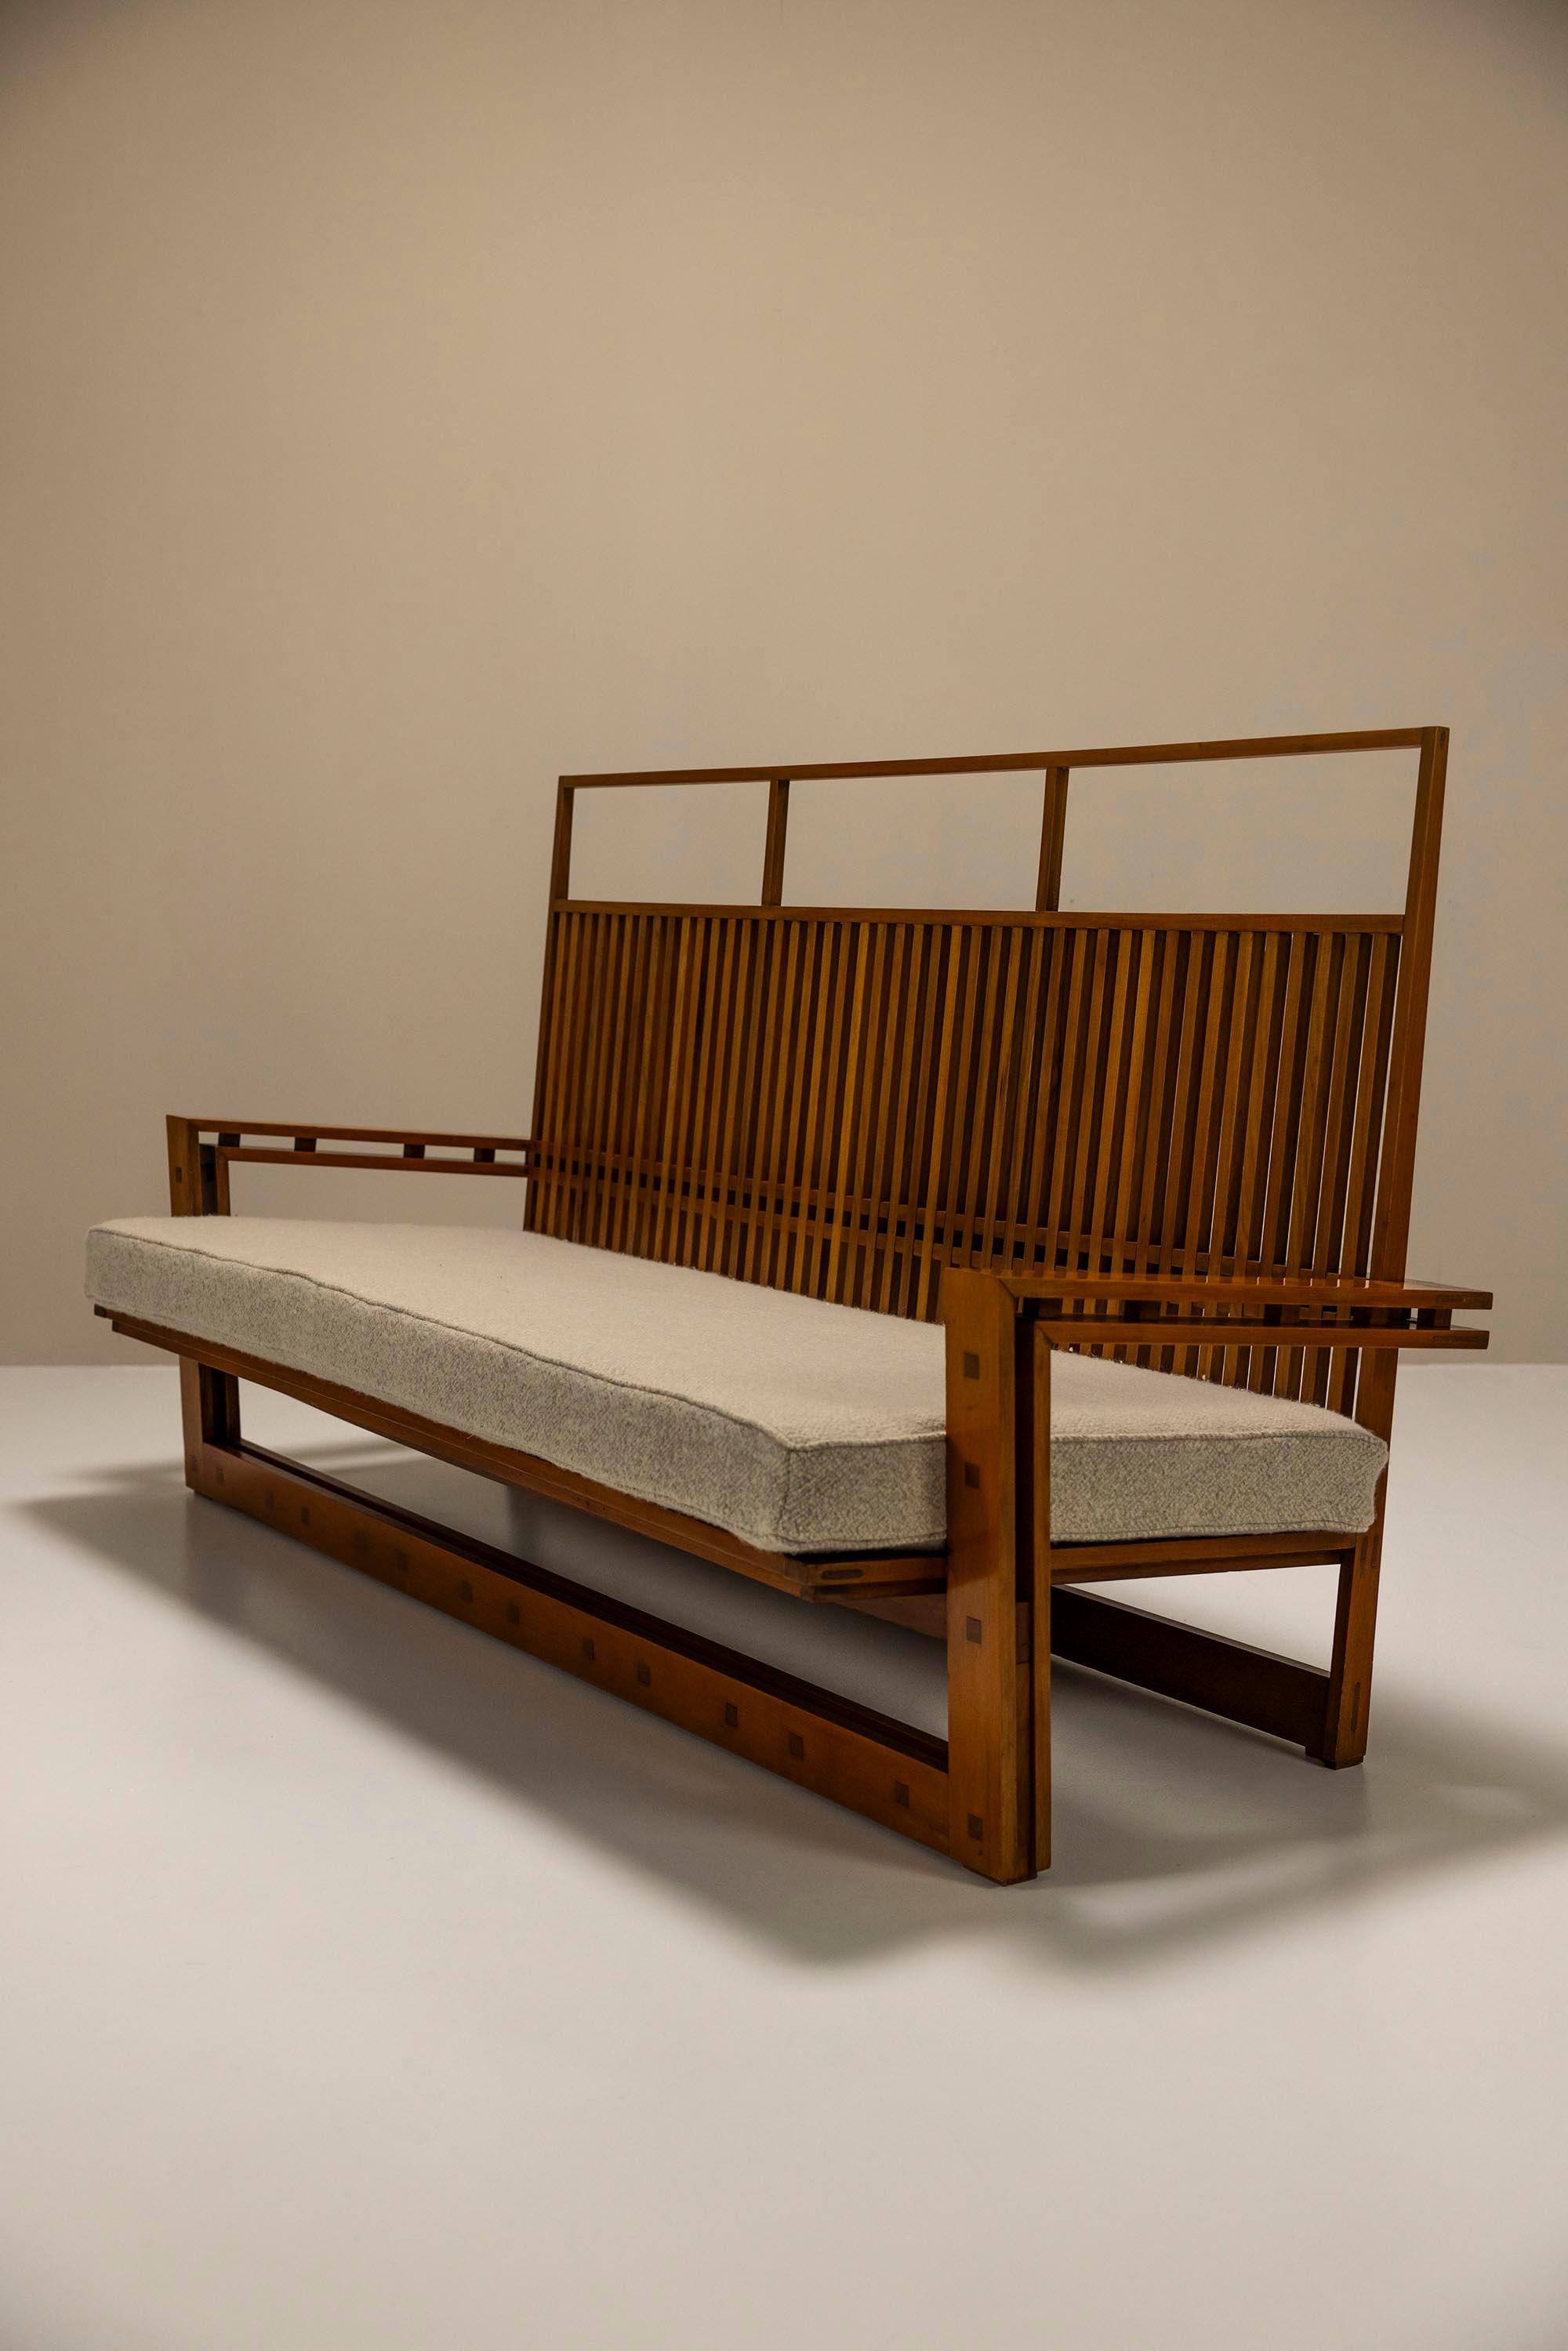 Fabric Three Seater Sofa In Solid Ash And Mansonia Wood By Fausto Bontempi, Italy 1961 For Sale